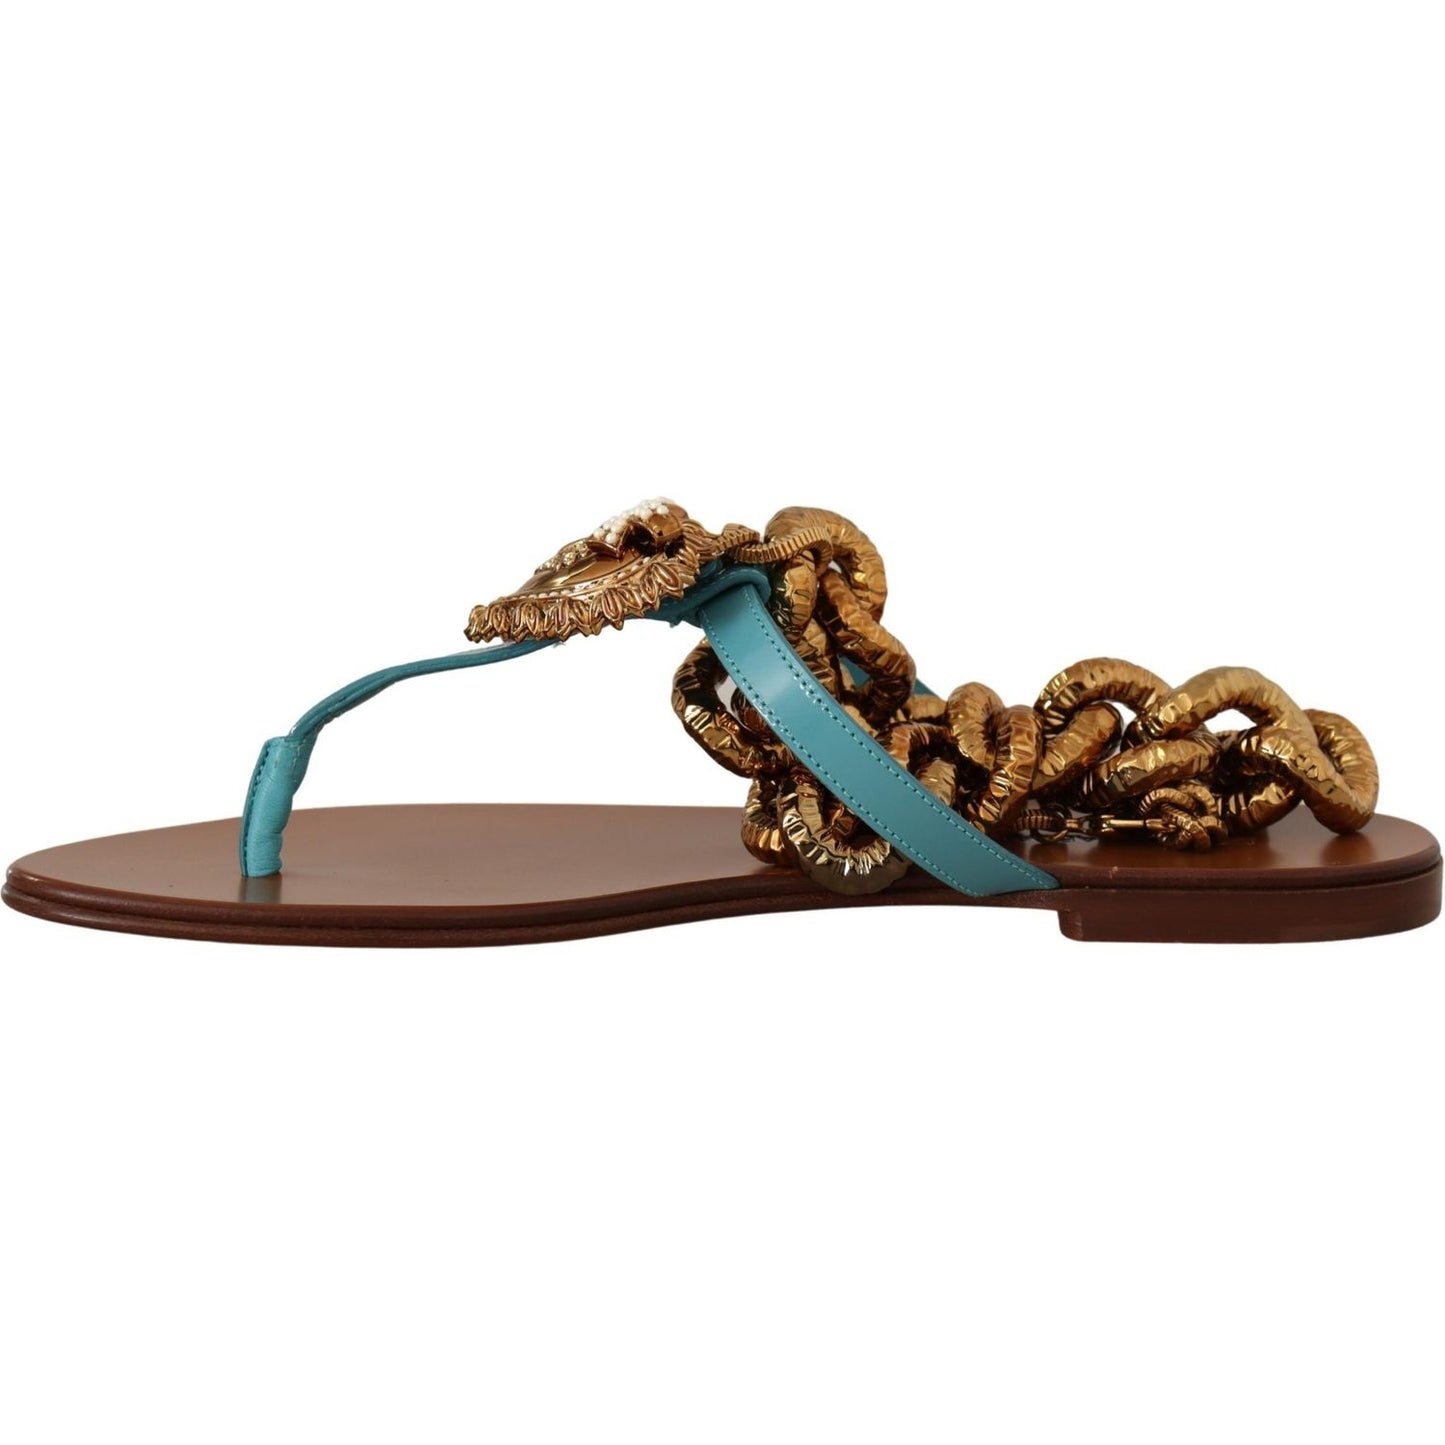 Dolce & Gabbana Chic Gladiator Flats with Heart Devotion Detail blue-leather-devotion-flats-sandals